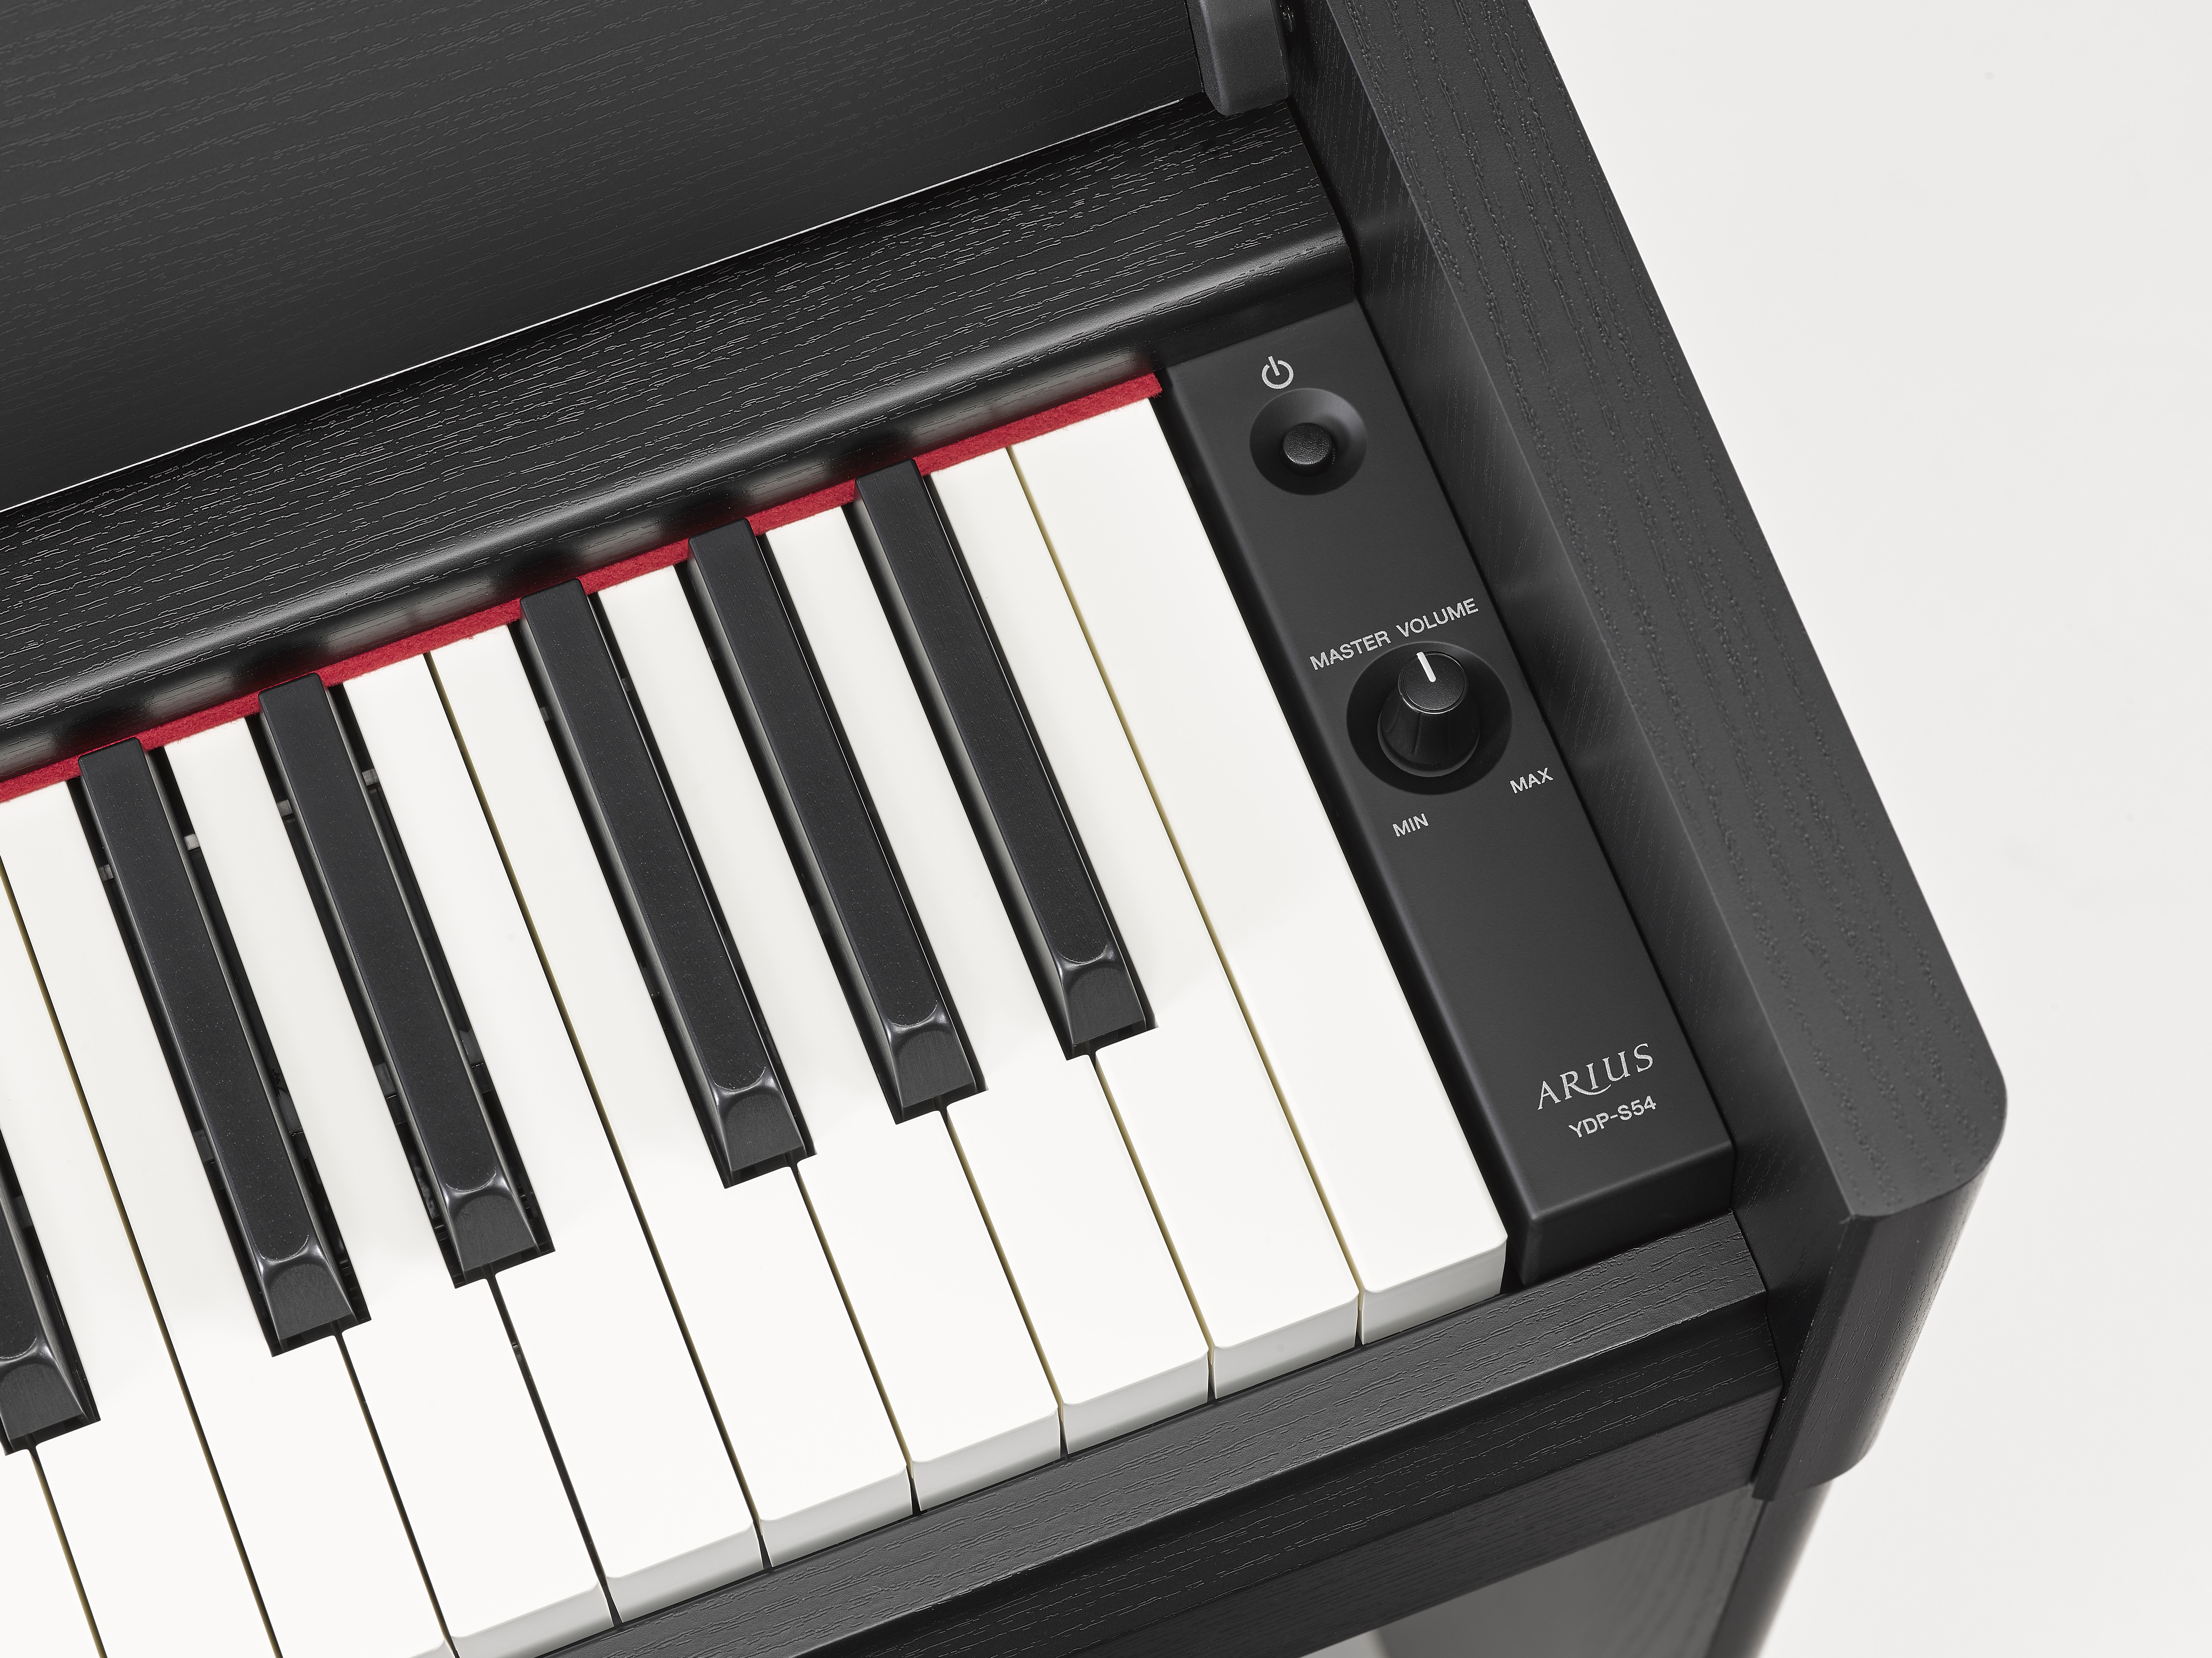 Yamaha Ydp-s54 - Black - Digital piano with stand - Variation 5